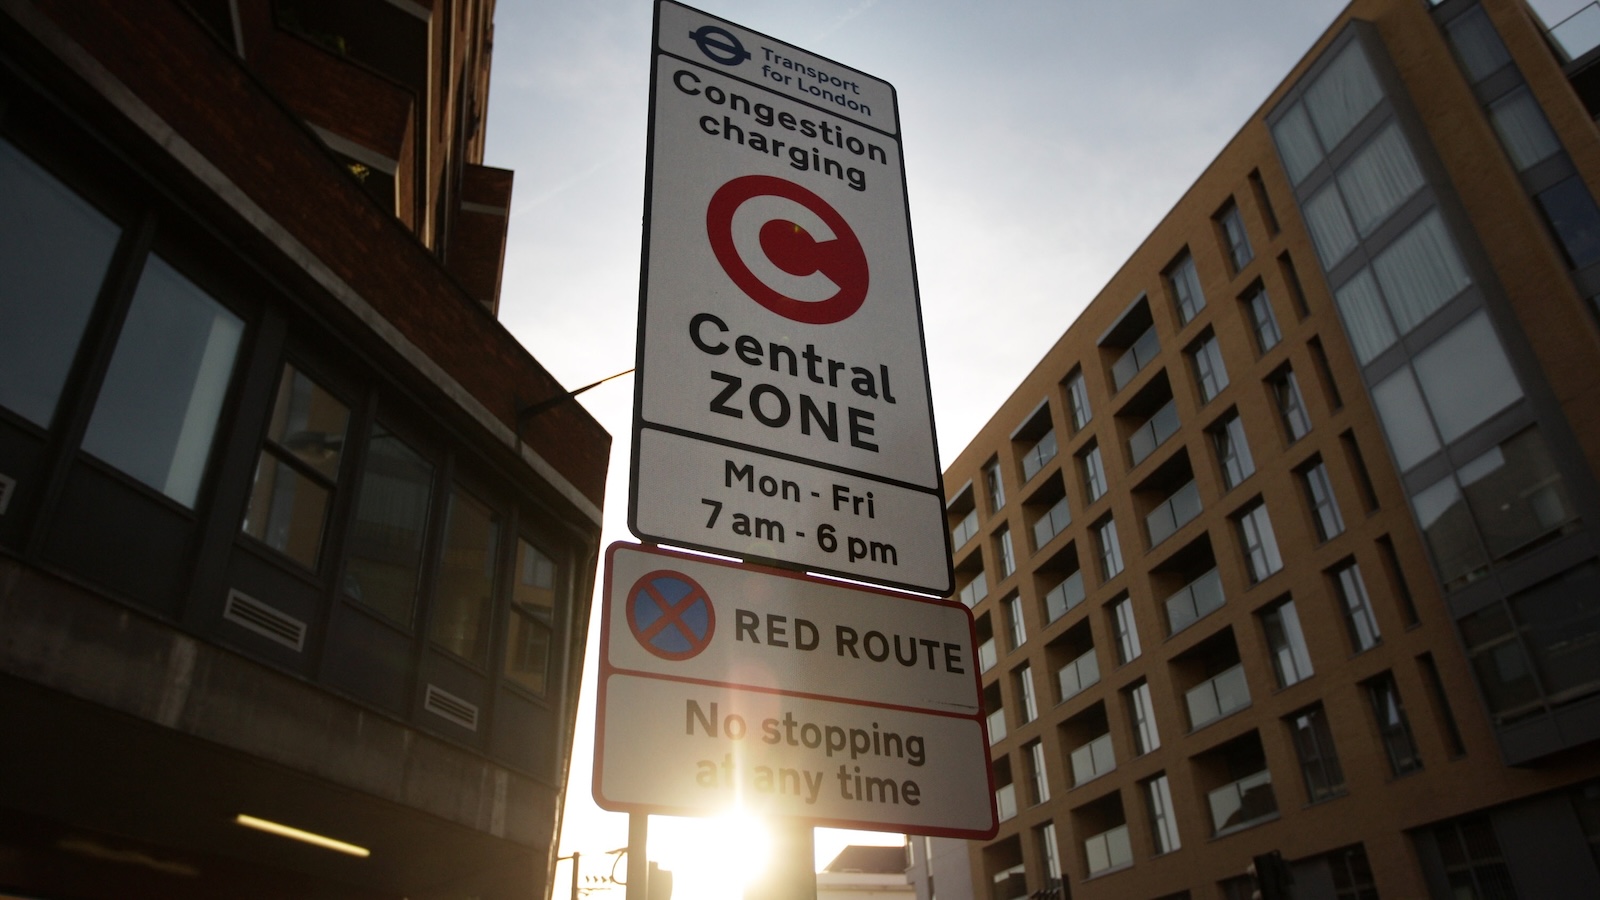 A sign, framed by the buildings on either side of it, informs motorists that they are entering London's congestion charge zone. The sign reads "Congestion charging central zone. Monday through Friday, 7 am through 6 pm."